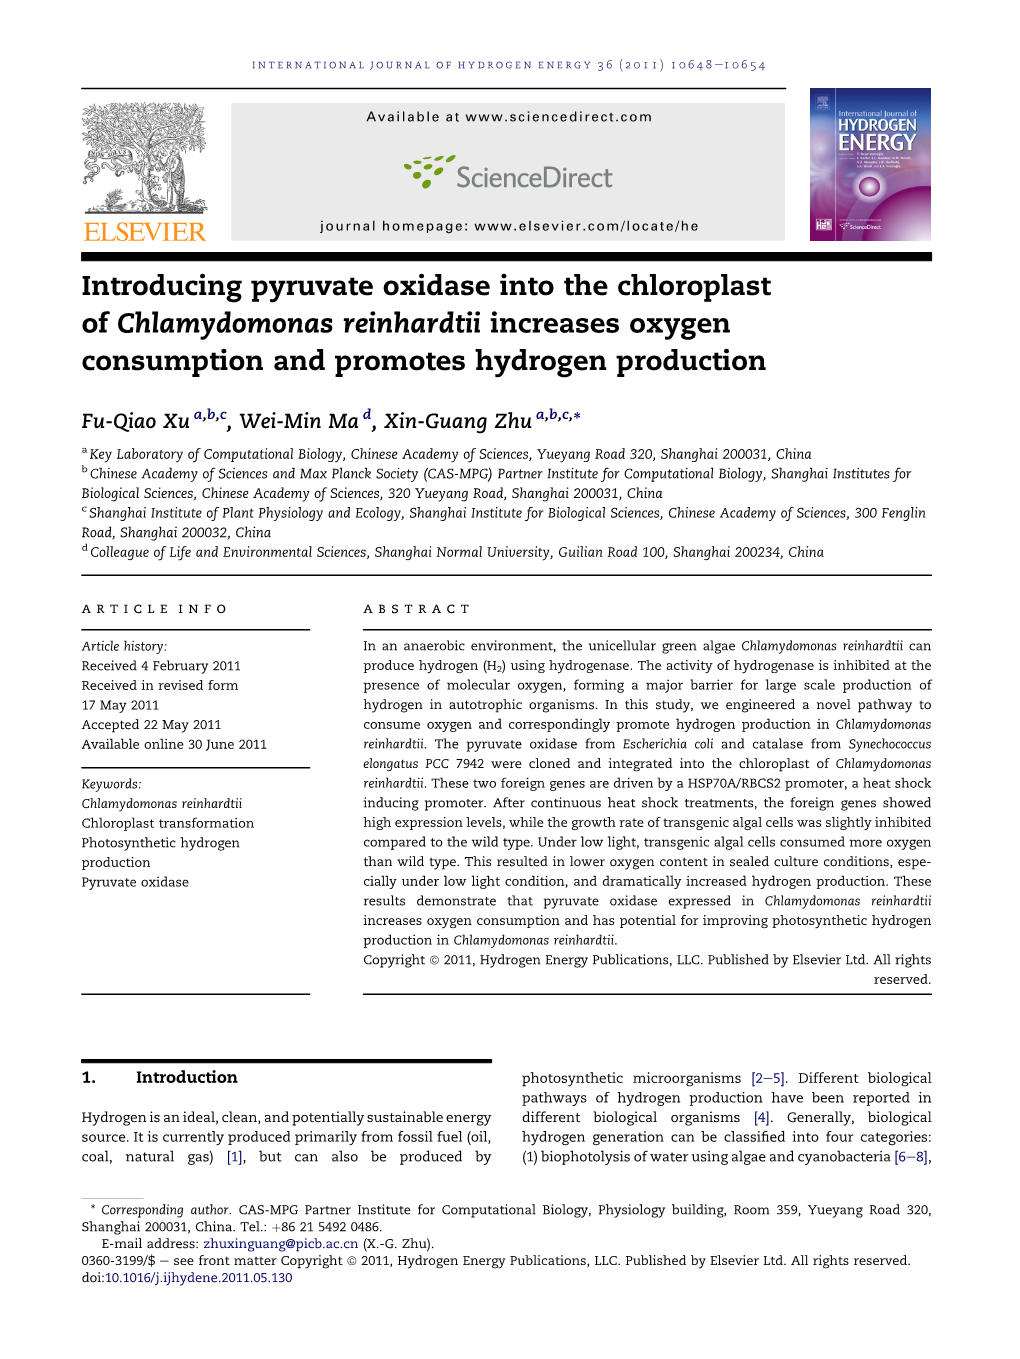 Introducing Pyruvate Oxidase Into the Chloroplast of Chlamydomonas Reinhardtii Increases Oxygen Consumption and Promotes Hydrogen Production